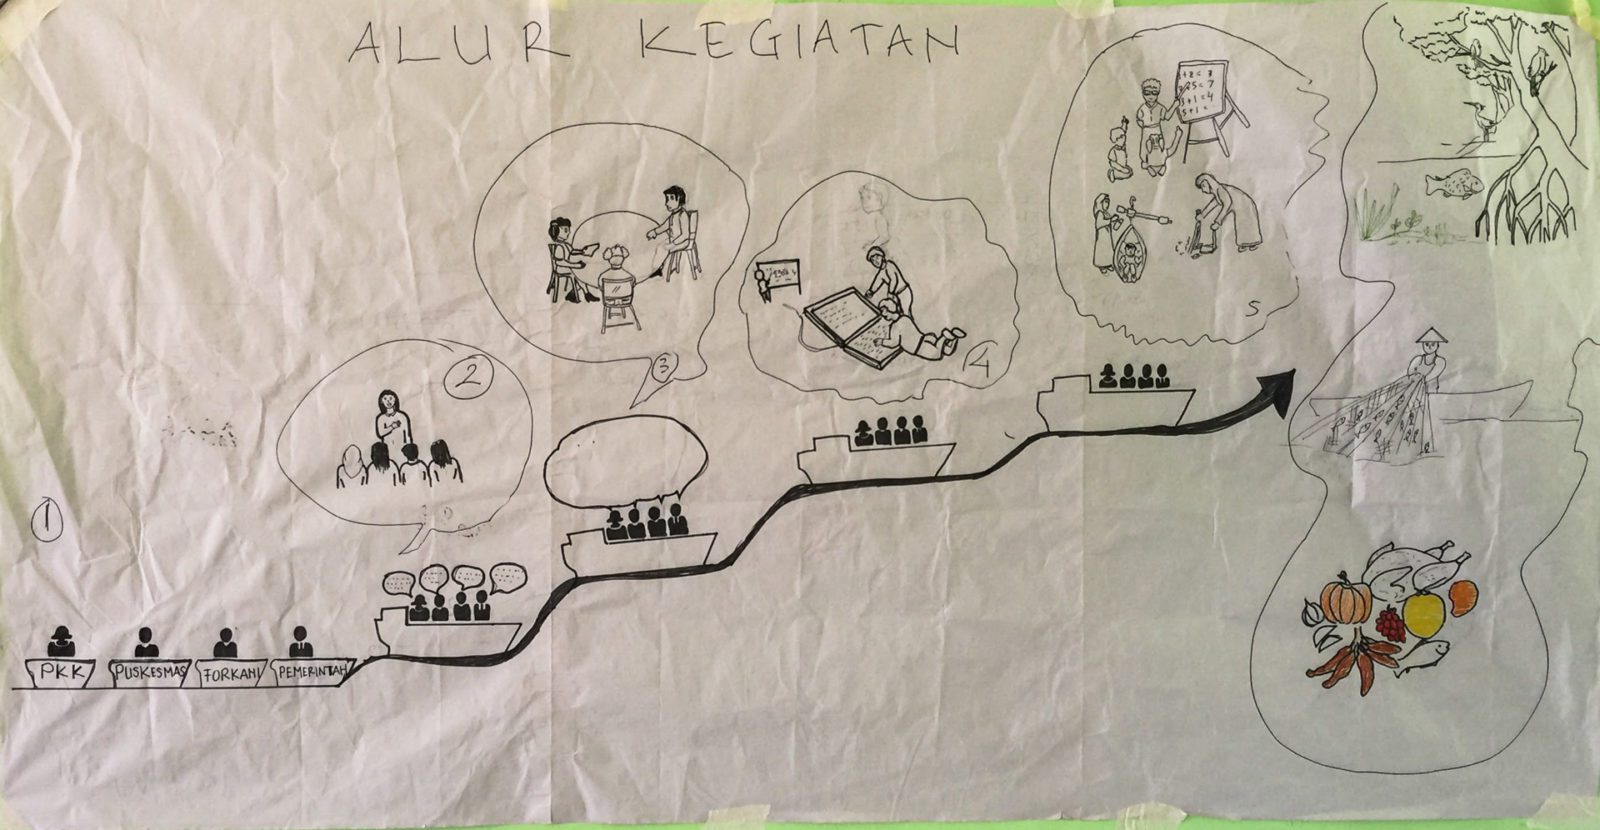 All in the same boat. The resulting sketch by the Forkani team shows different organisations coming together and all using the same boat to reach the community.